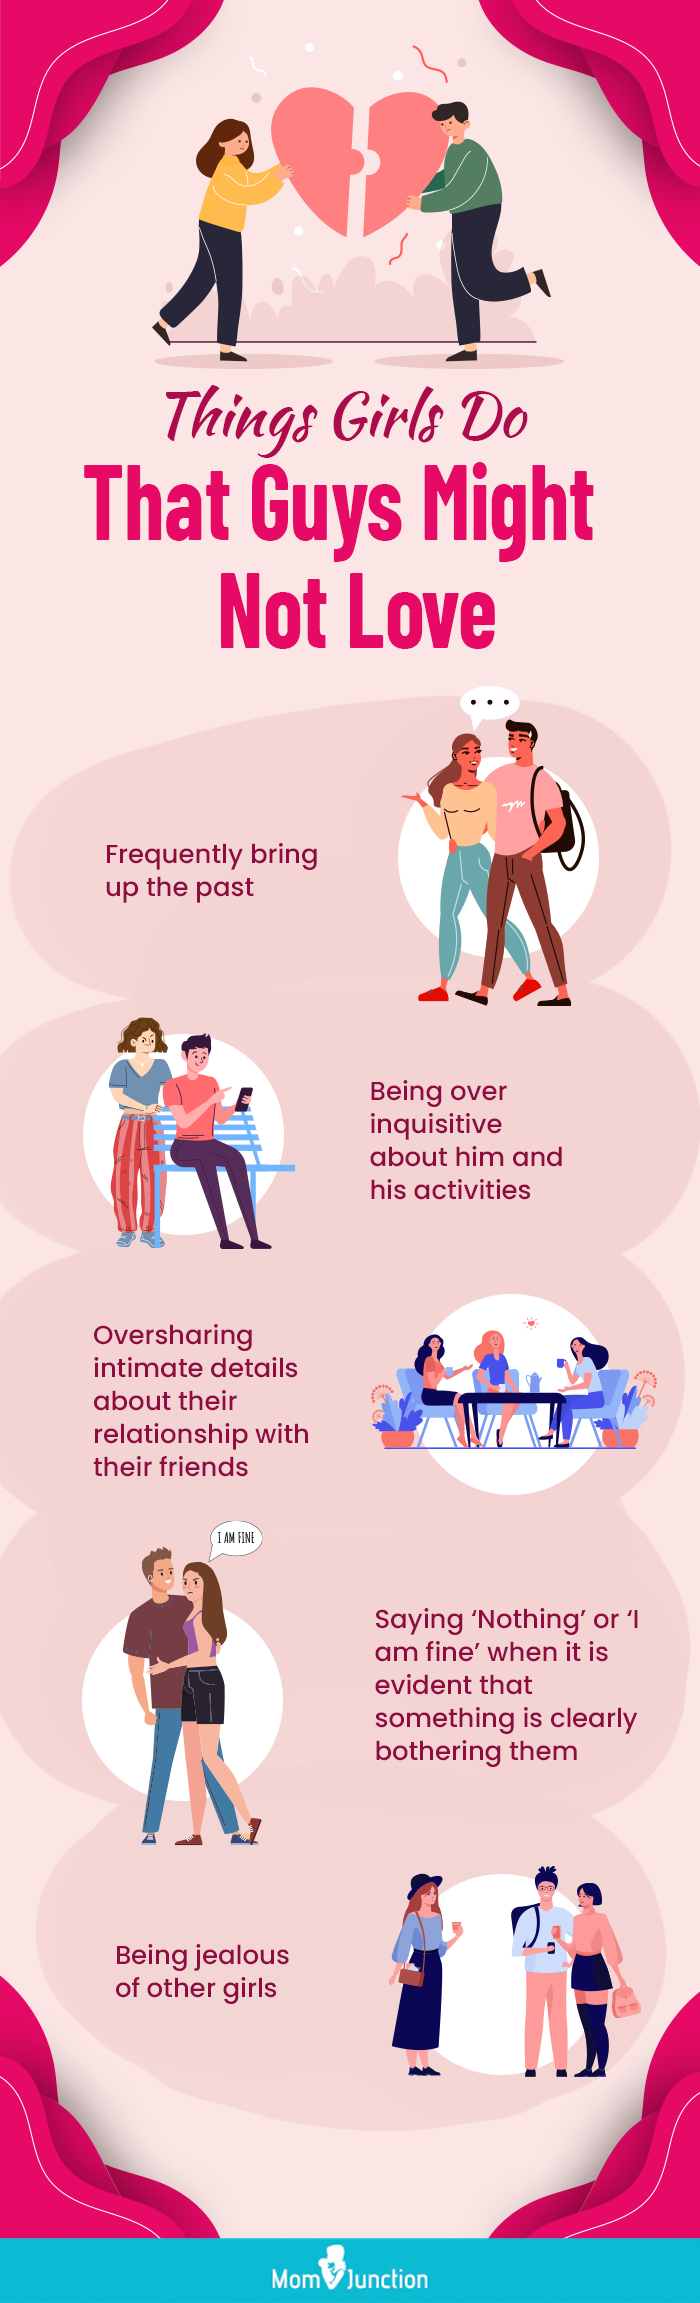 things girls do that guys might not love (infographic)